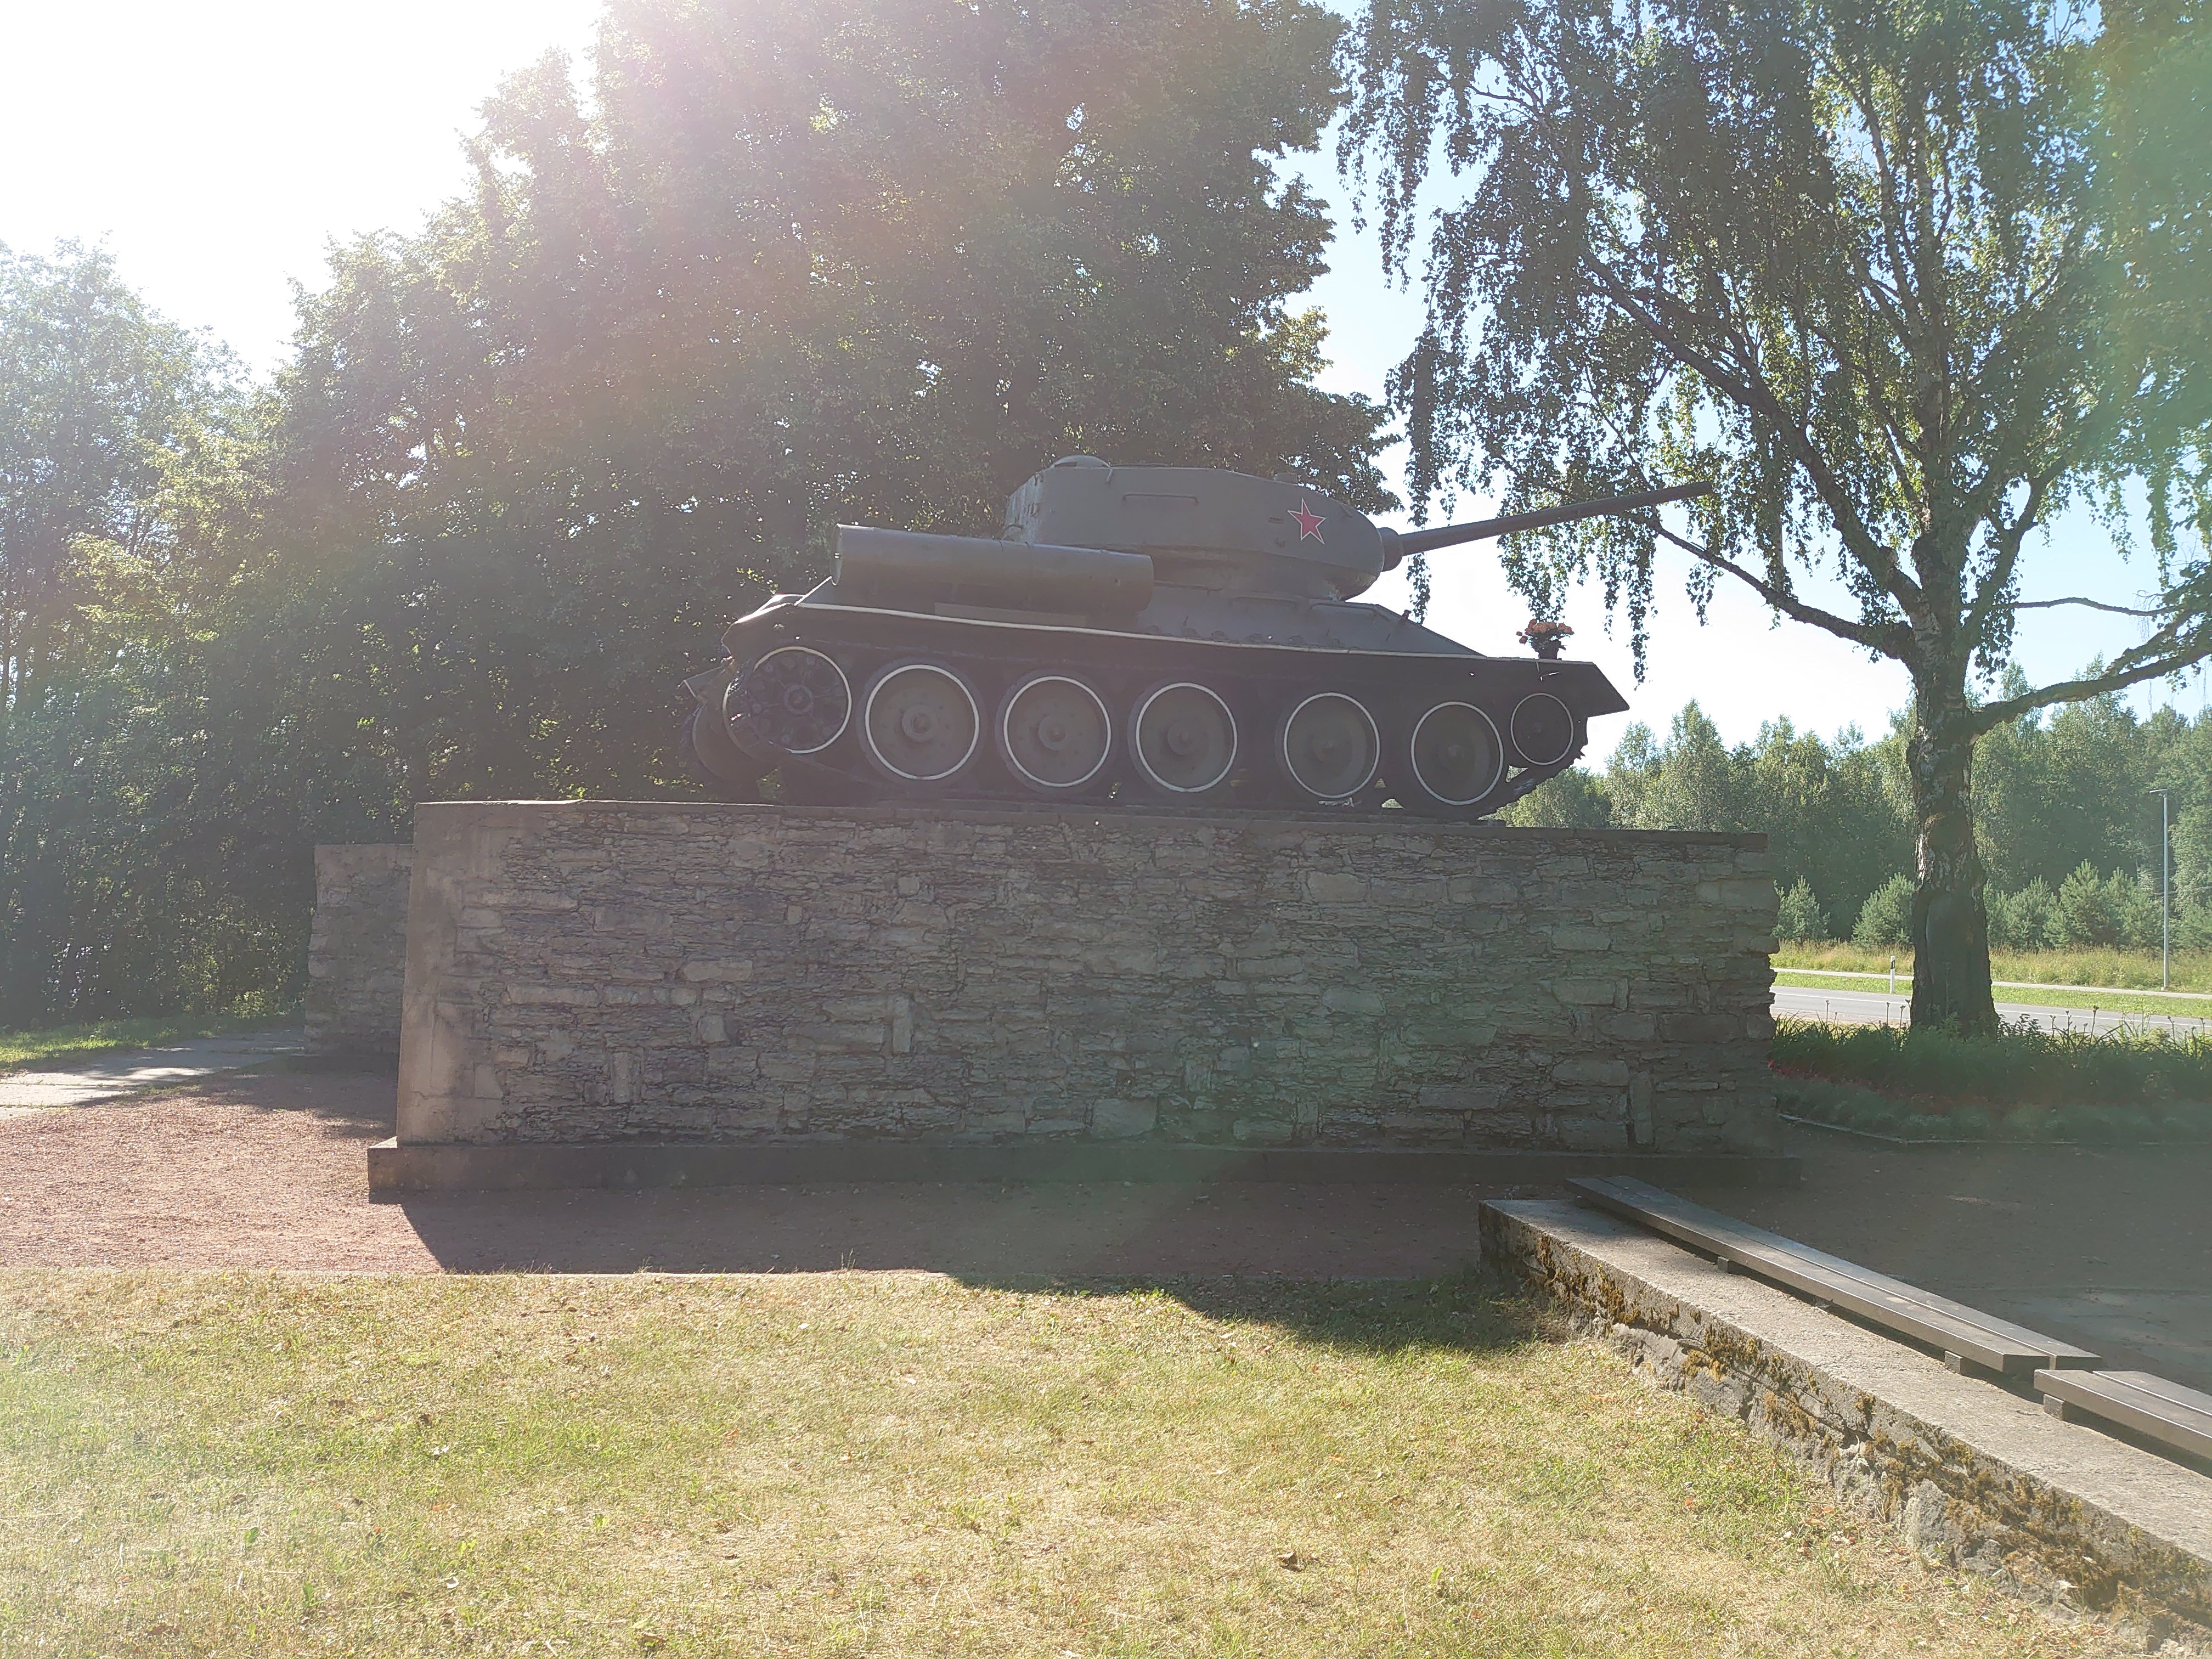 Tank T-34 as a monument mark of the Soviet military's defense of Narva in 1944 on the breakthrough of the Narva River rephoto